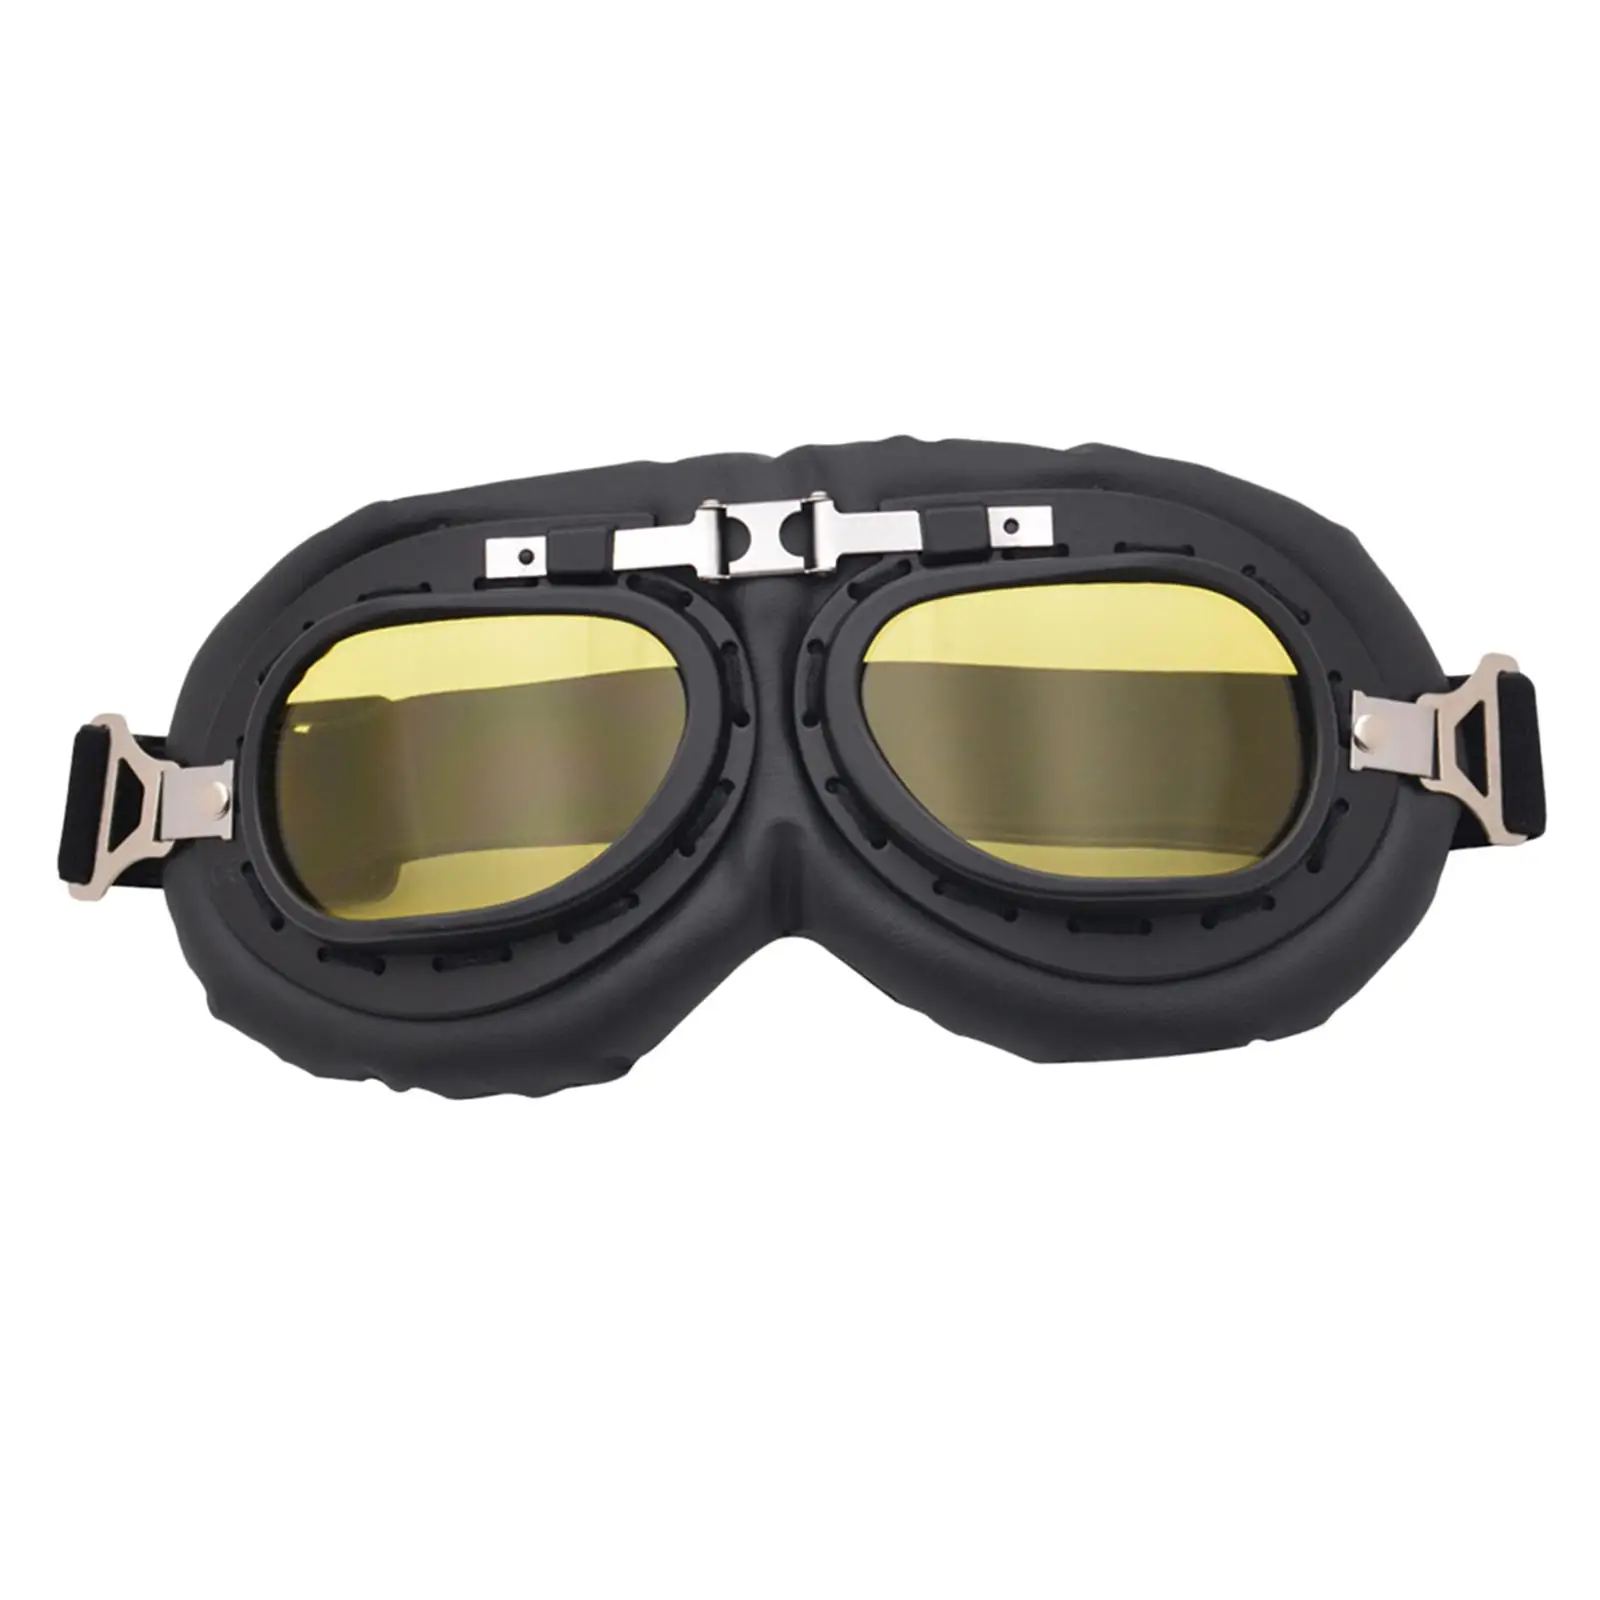 Motorcycle Goggles Classic Anti-Scratch Vintage Fit for Off-Road ATV